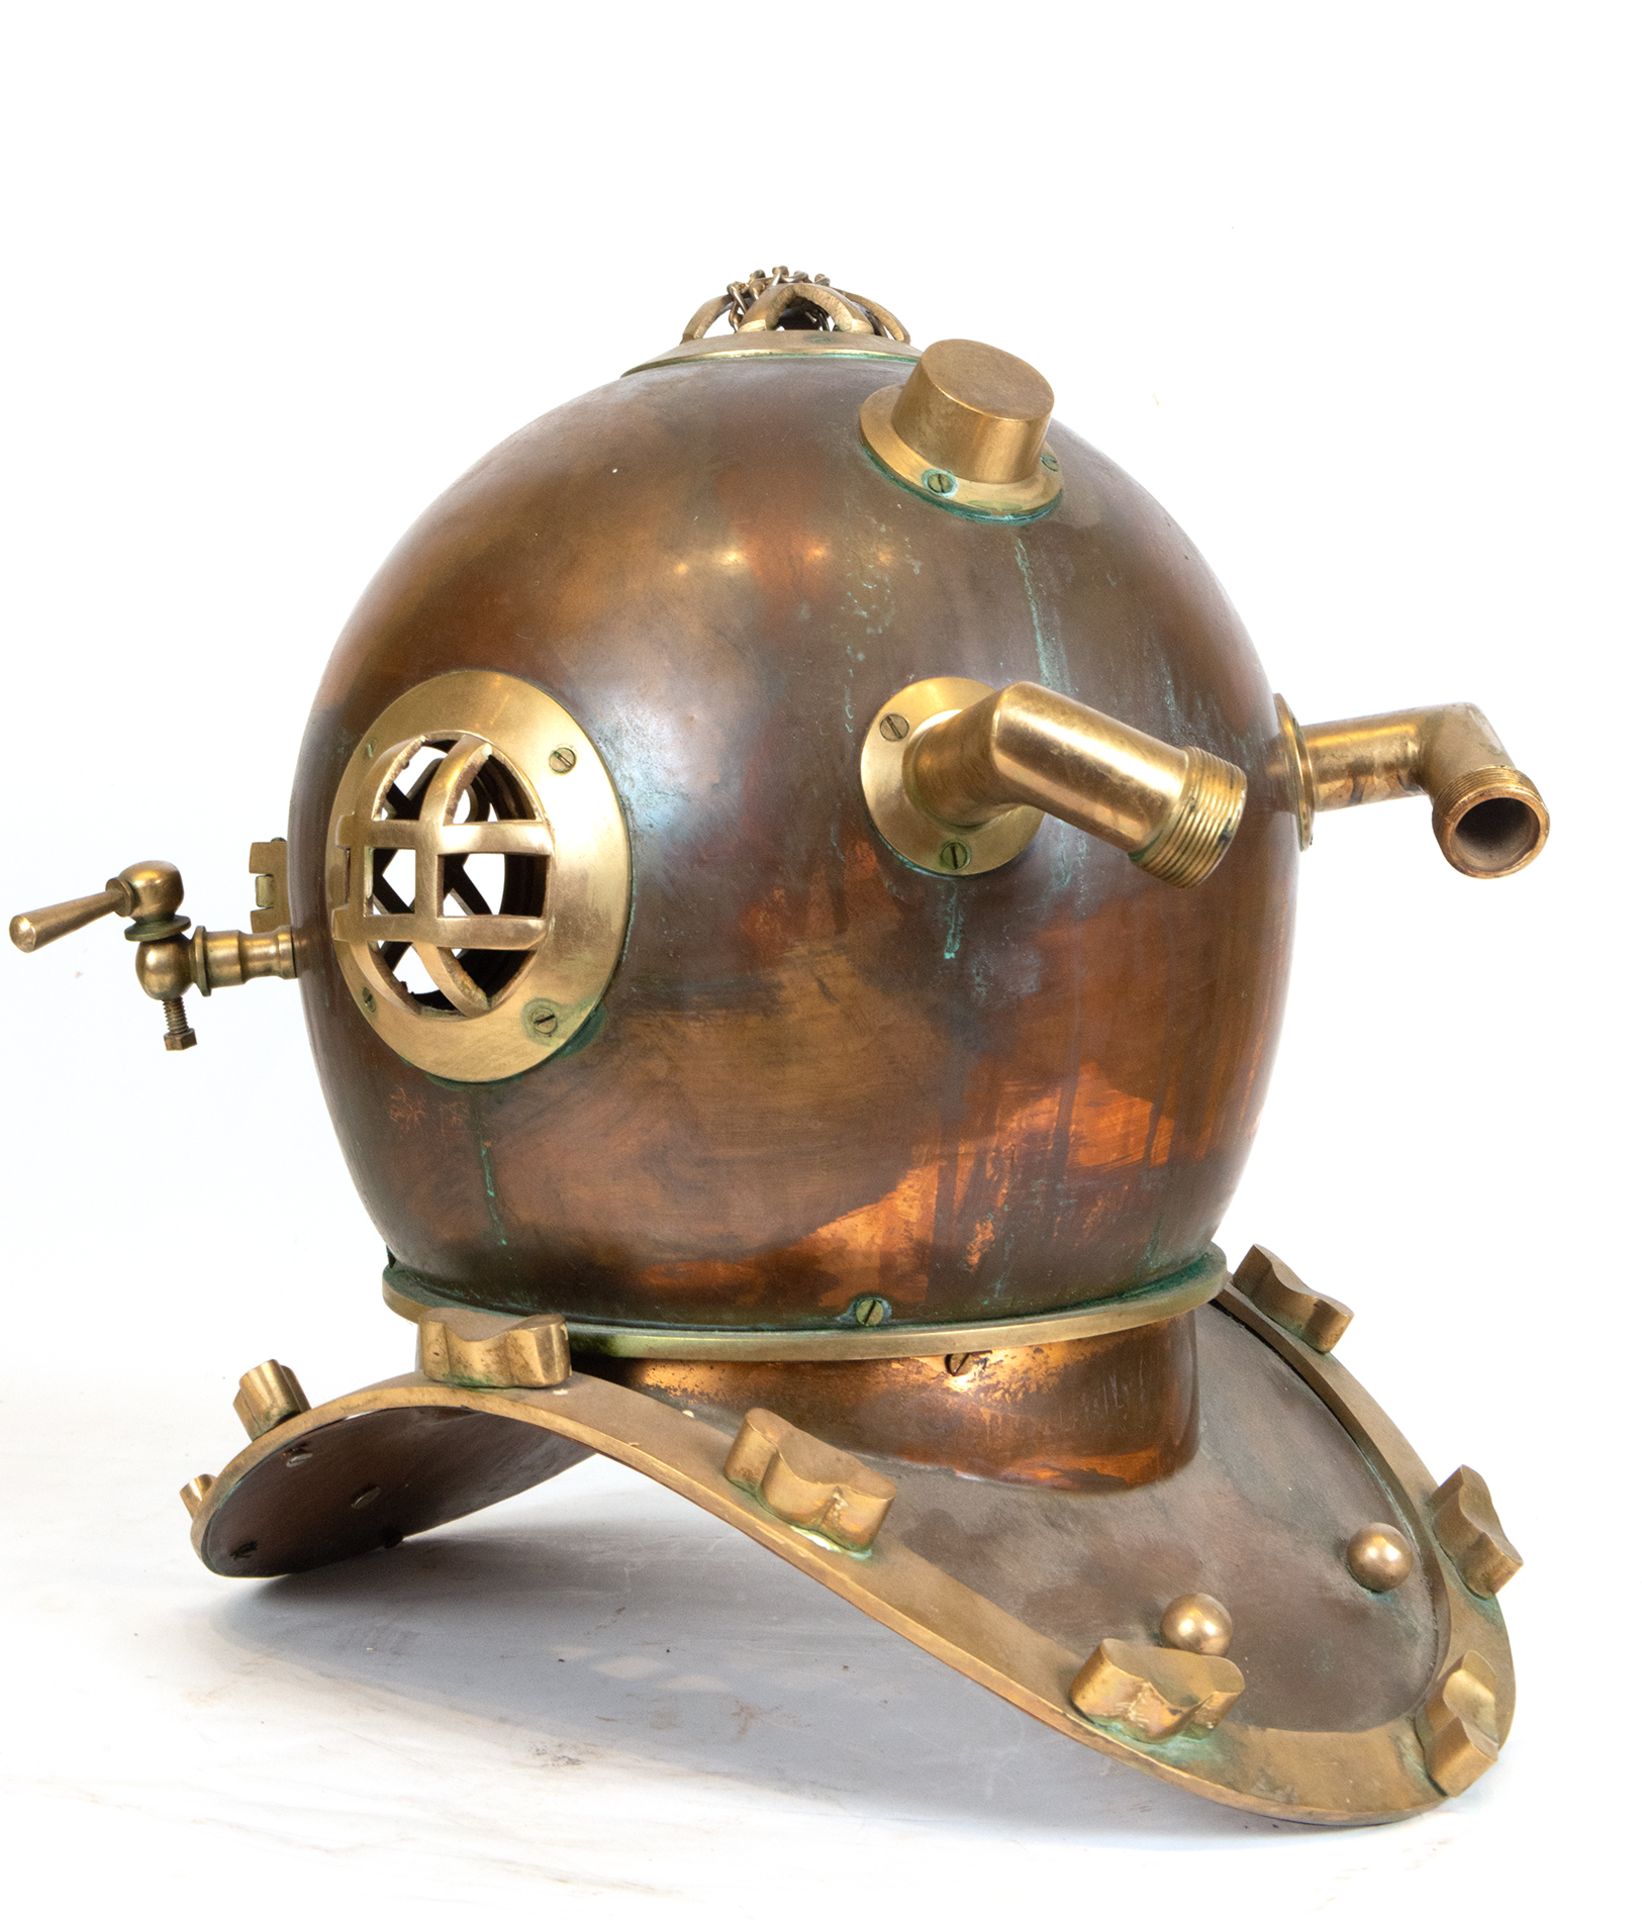 Rare Solid Bronze Diver's Helmet, Italy or England, late 19th century - early 20th century - Image 5 of 5